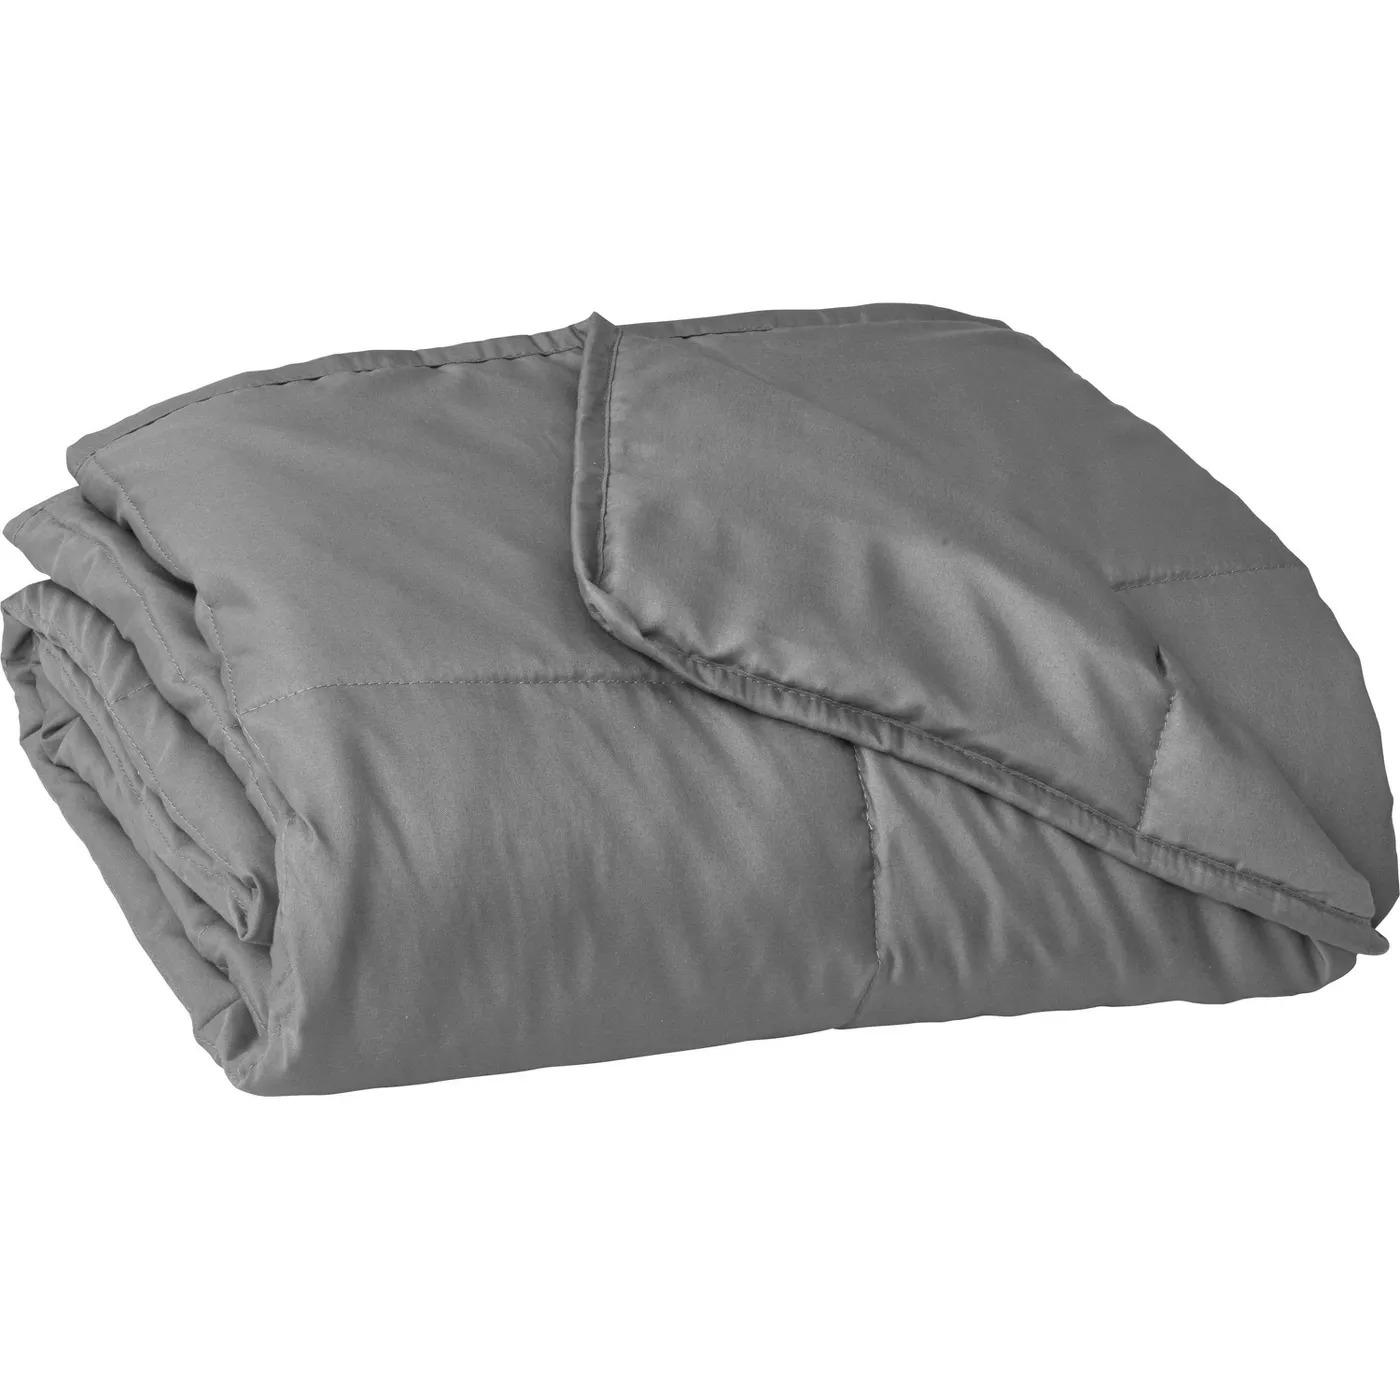 48x72 Tranquility Essentials Weighted Blanket for $12.50